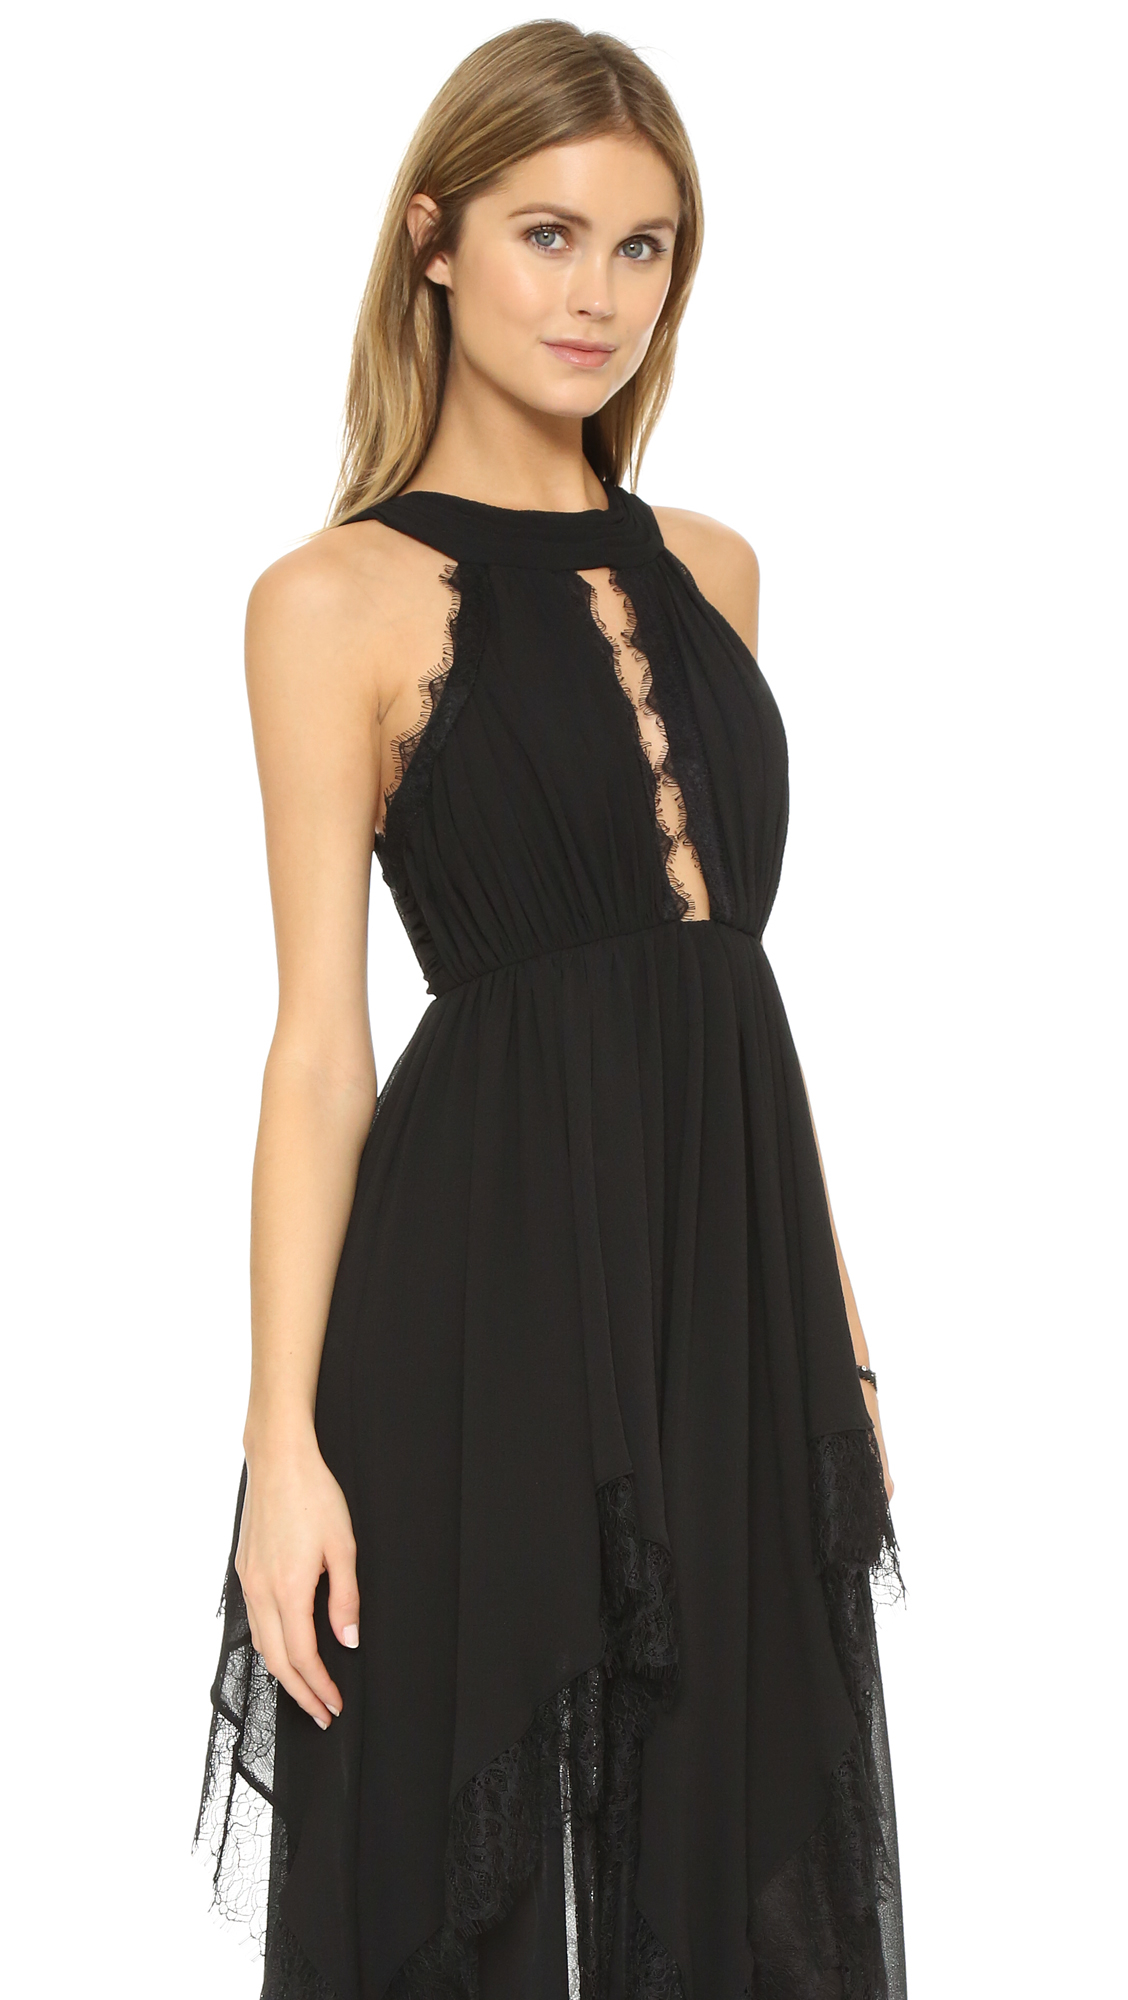 Lyst - Free People Ivory Tower Maxi Dress in Black